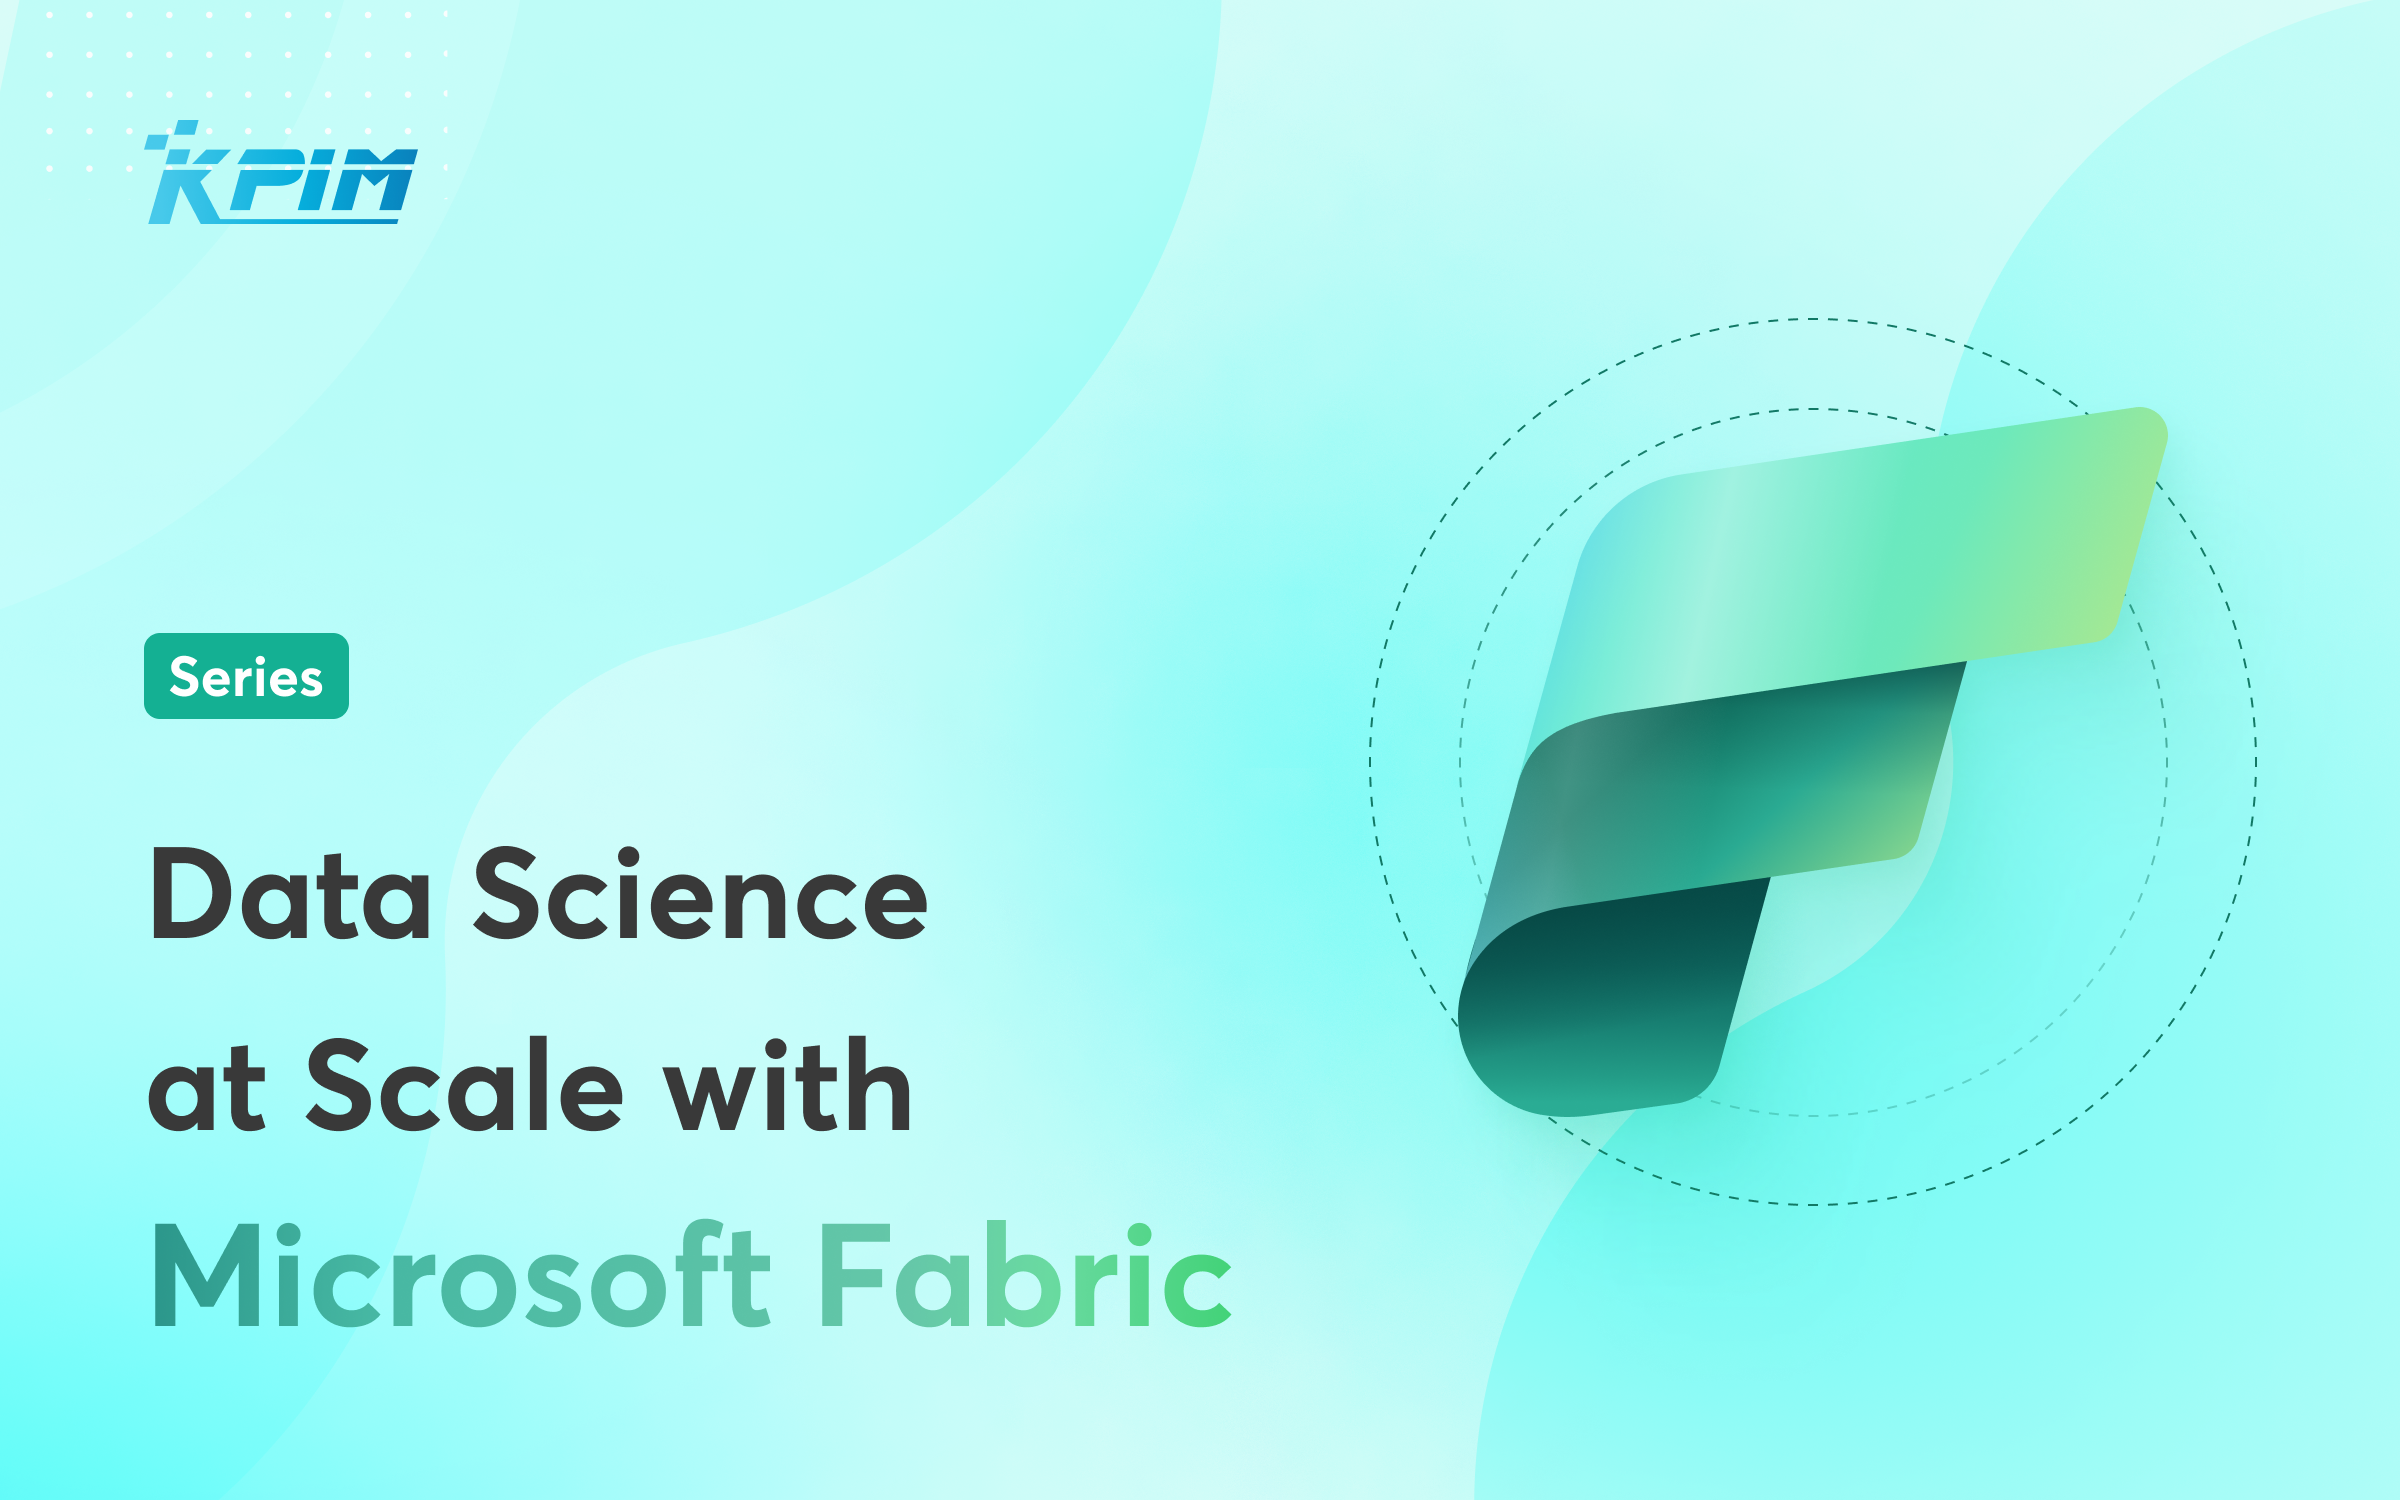 Series "Data Science at Scale with Microsoft Fabric"